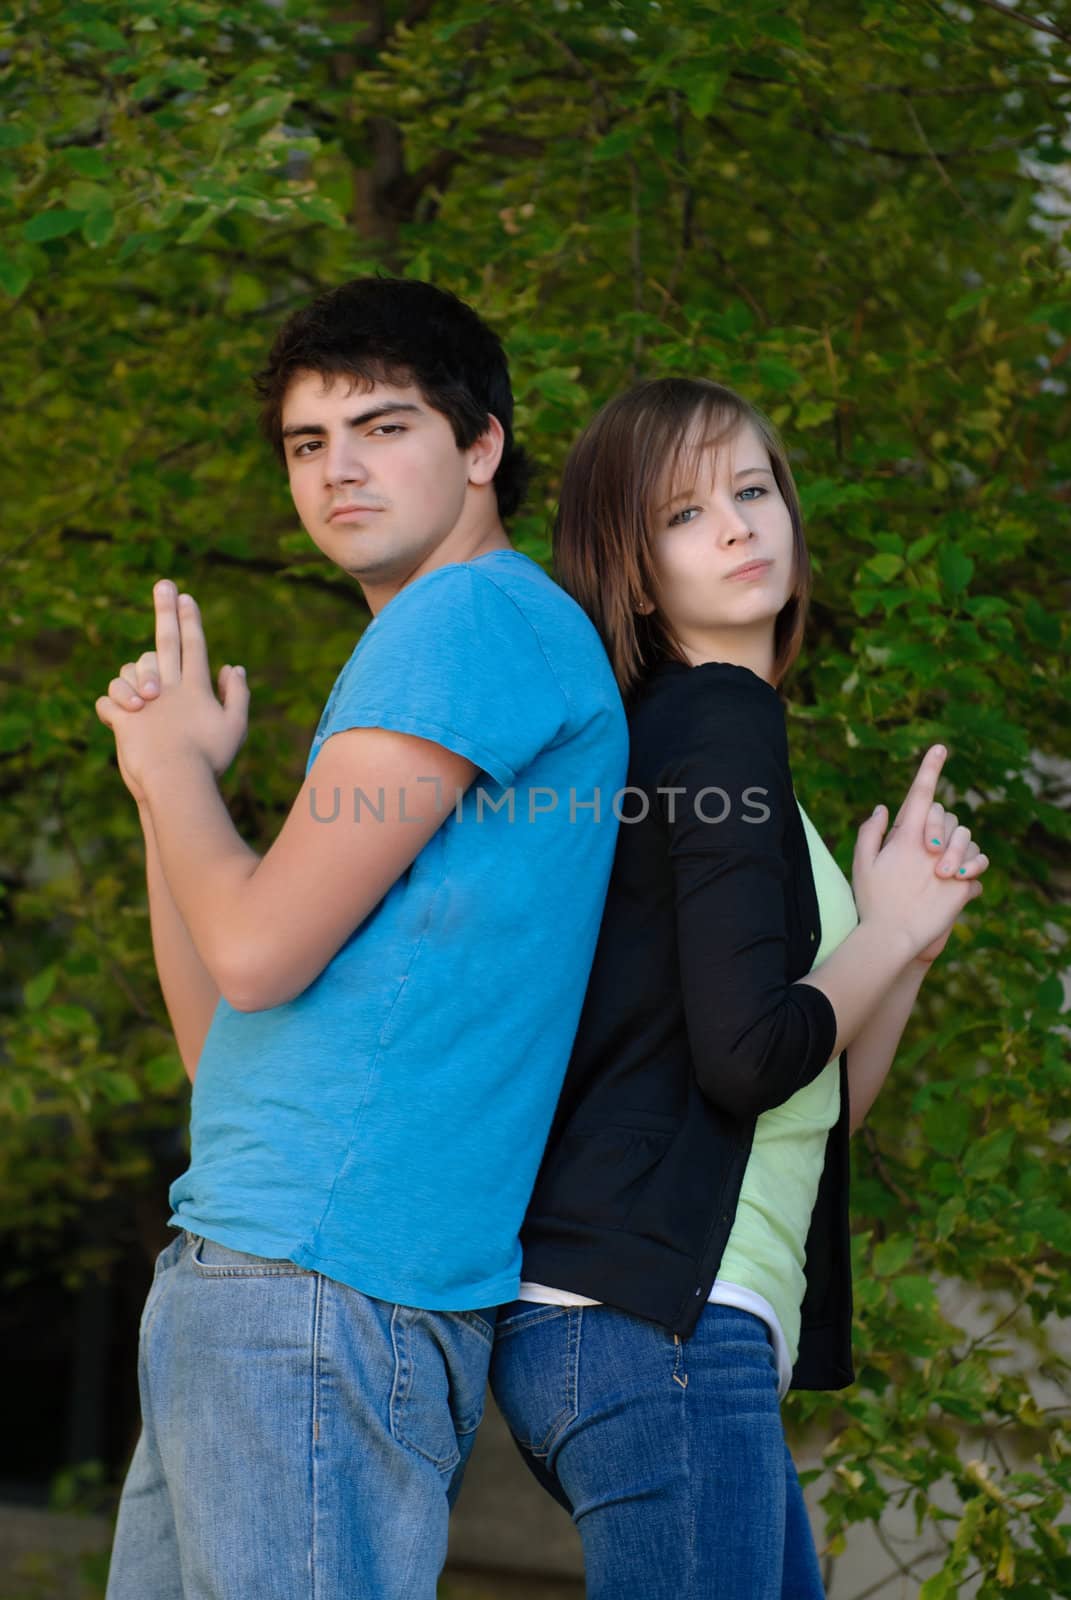 Two teens having fun and pretending to hold guns while standing back to back.